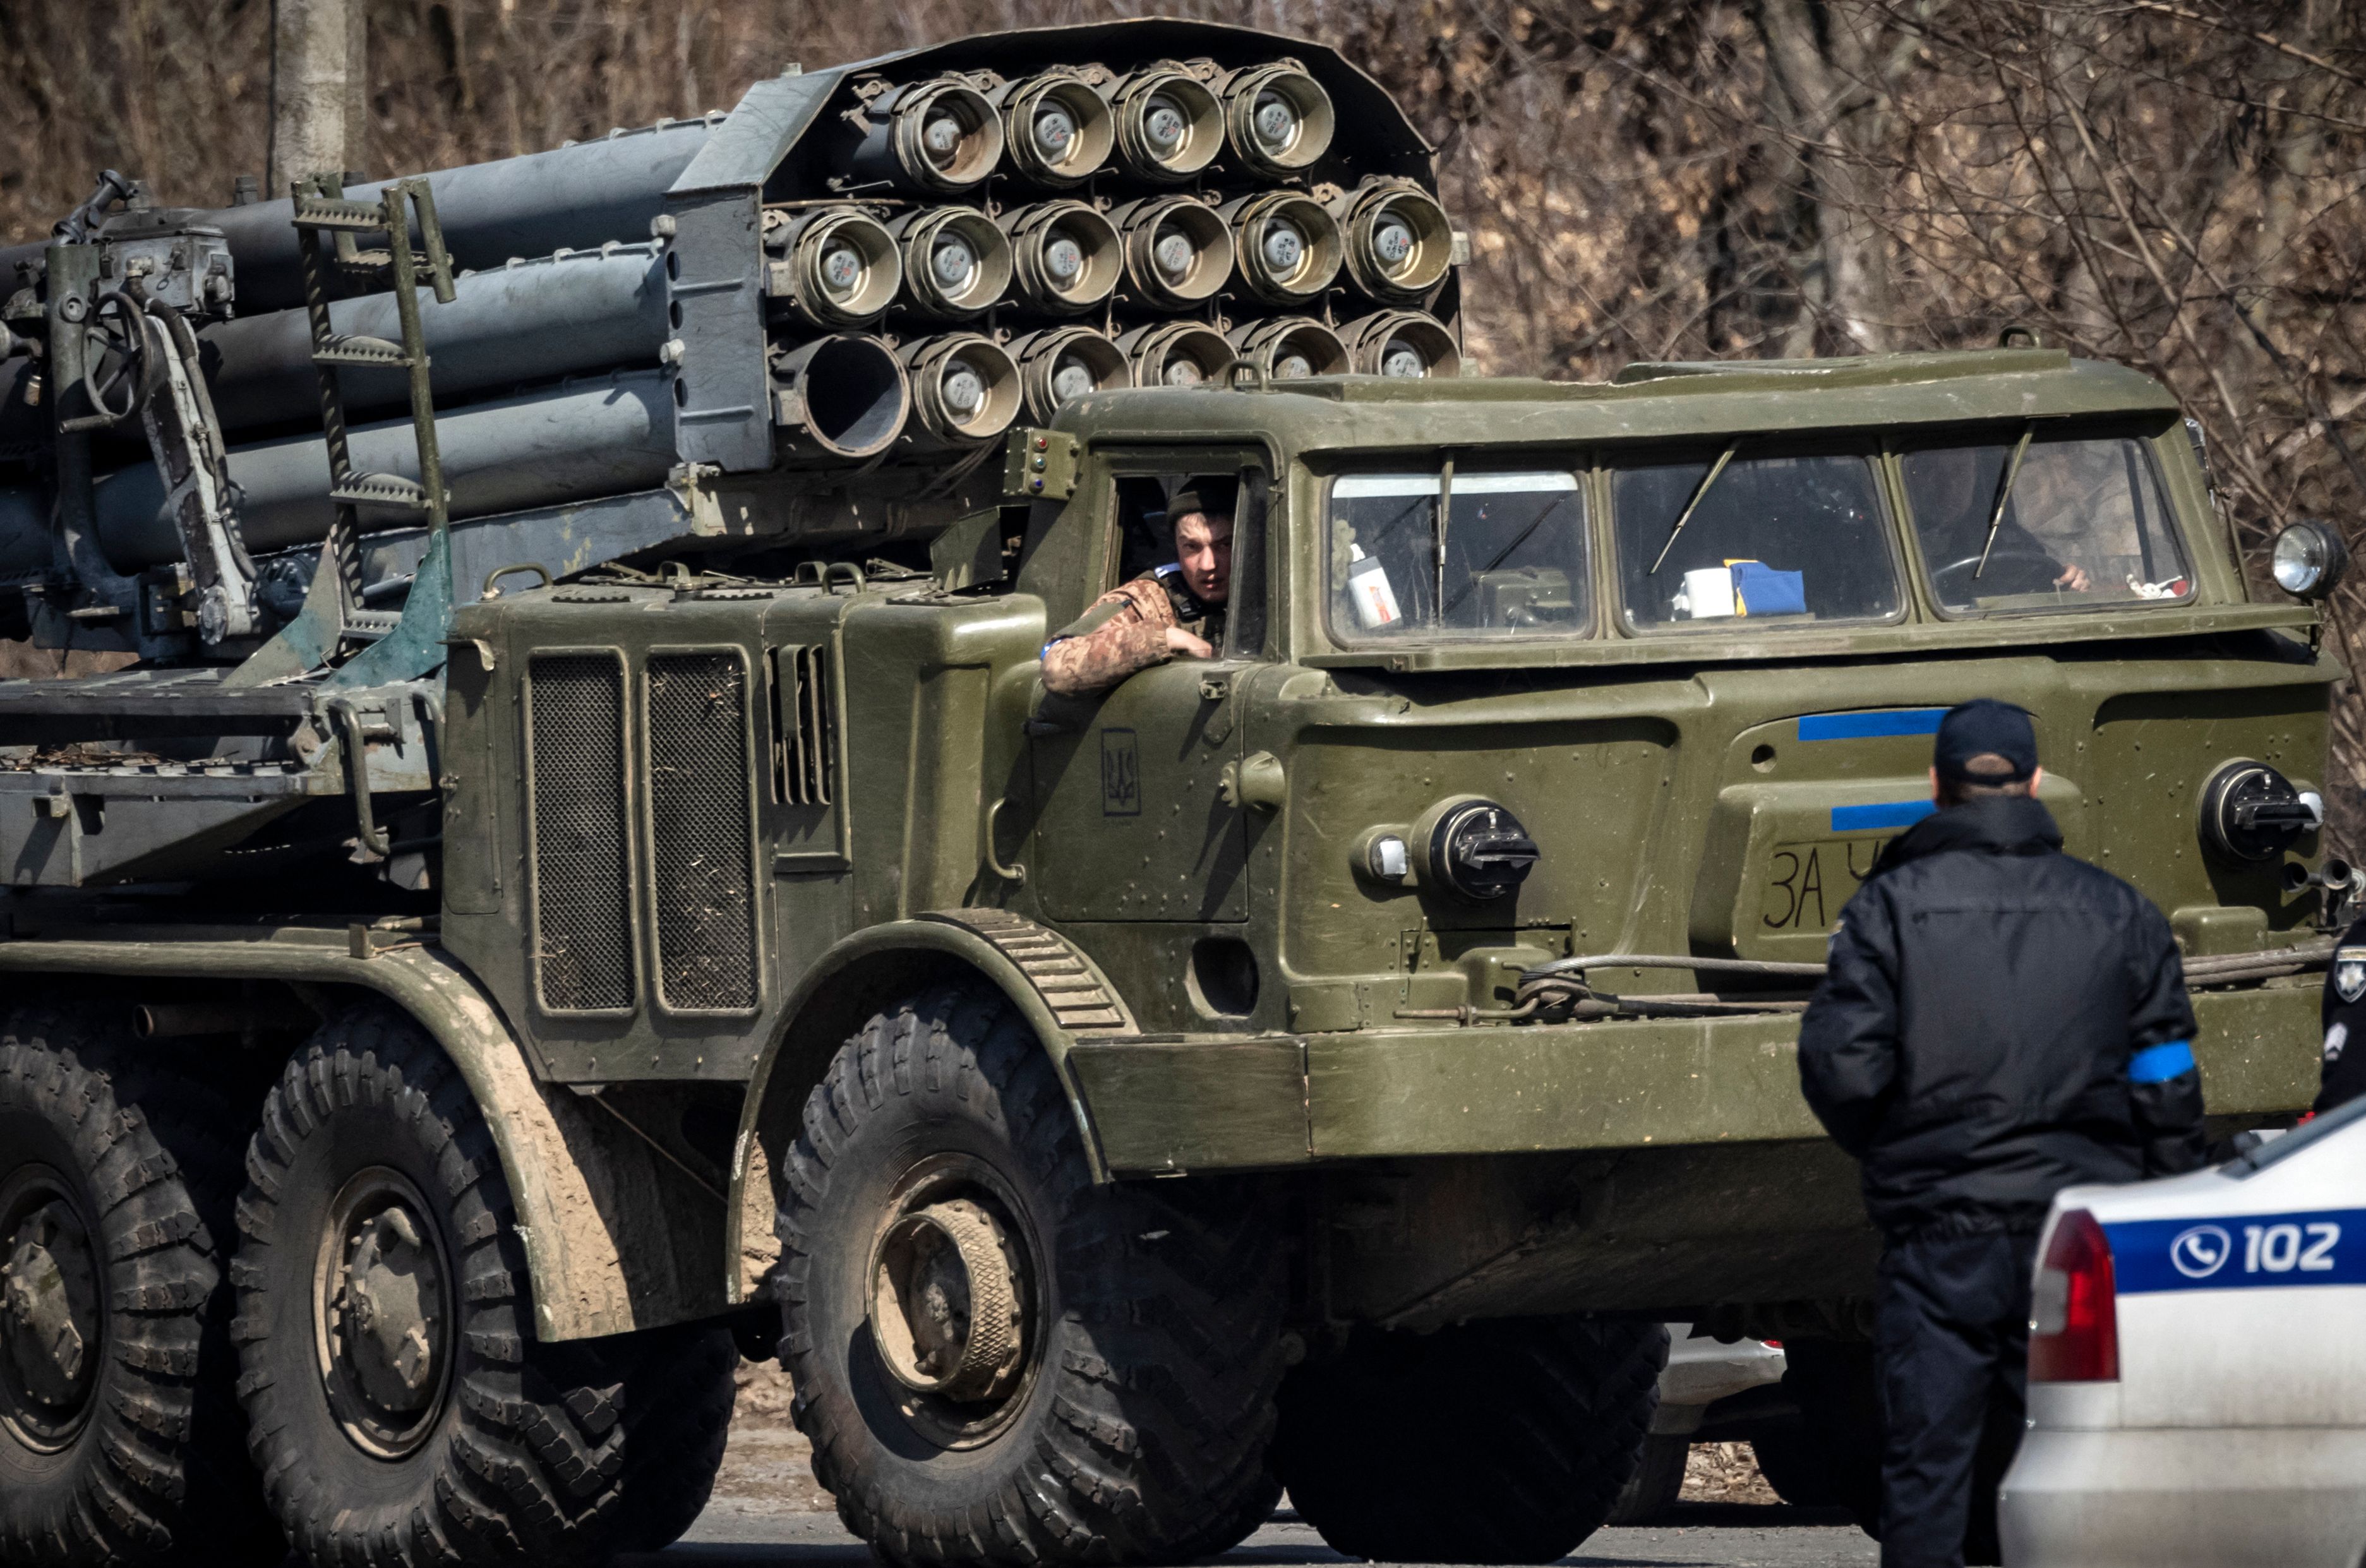 A Ukrainian military vehicle is seen on the road in Kyiv, Ukraine, on March 24.